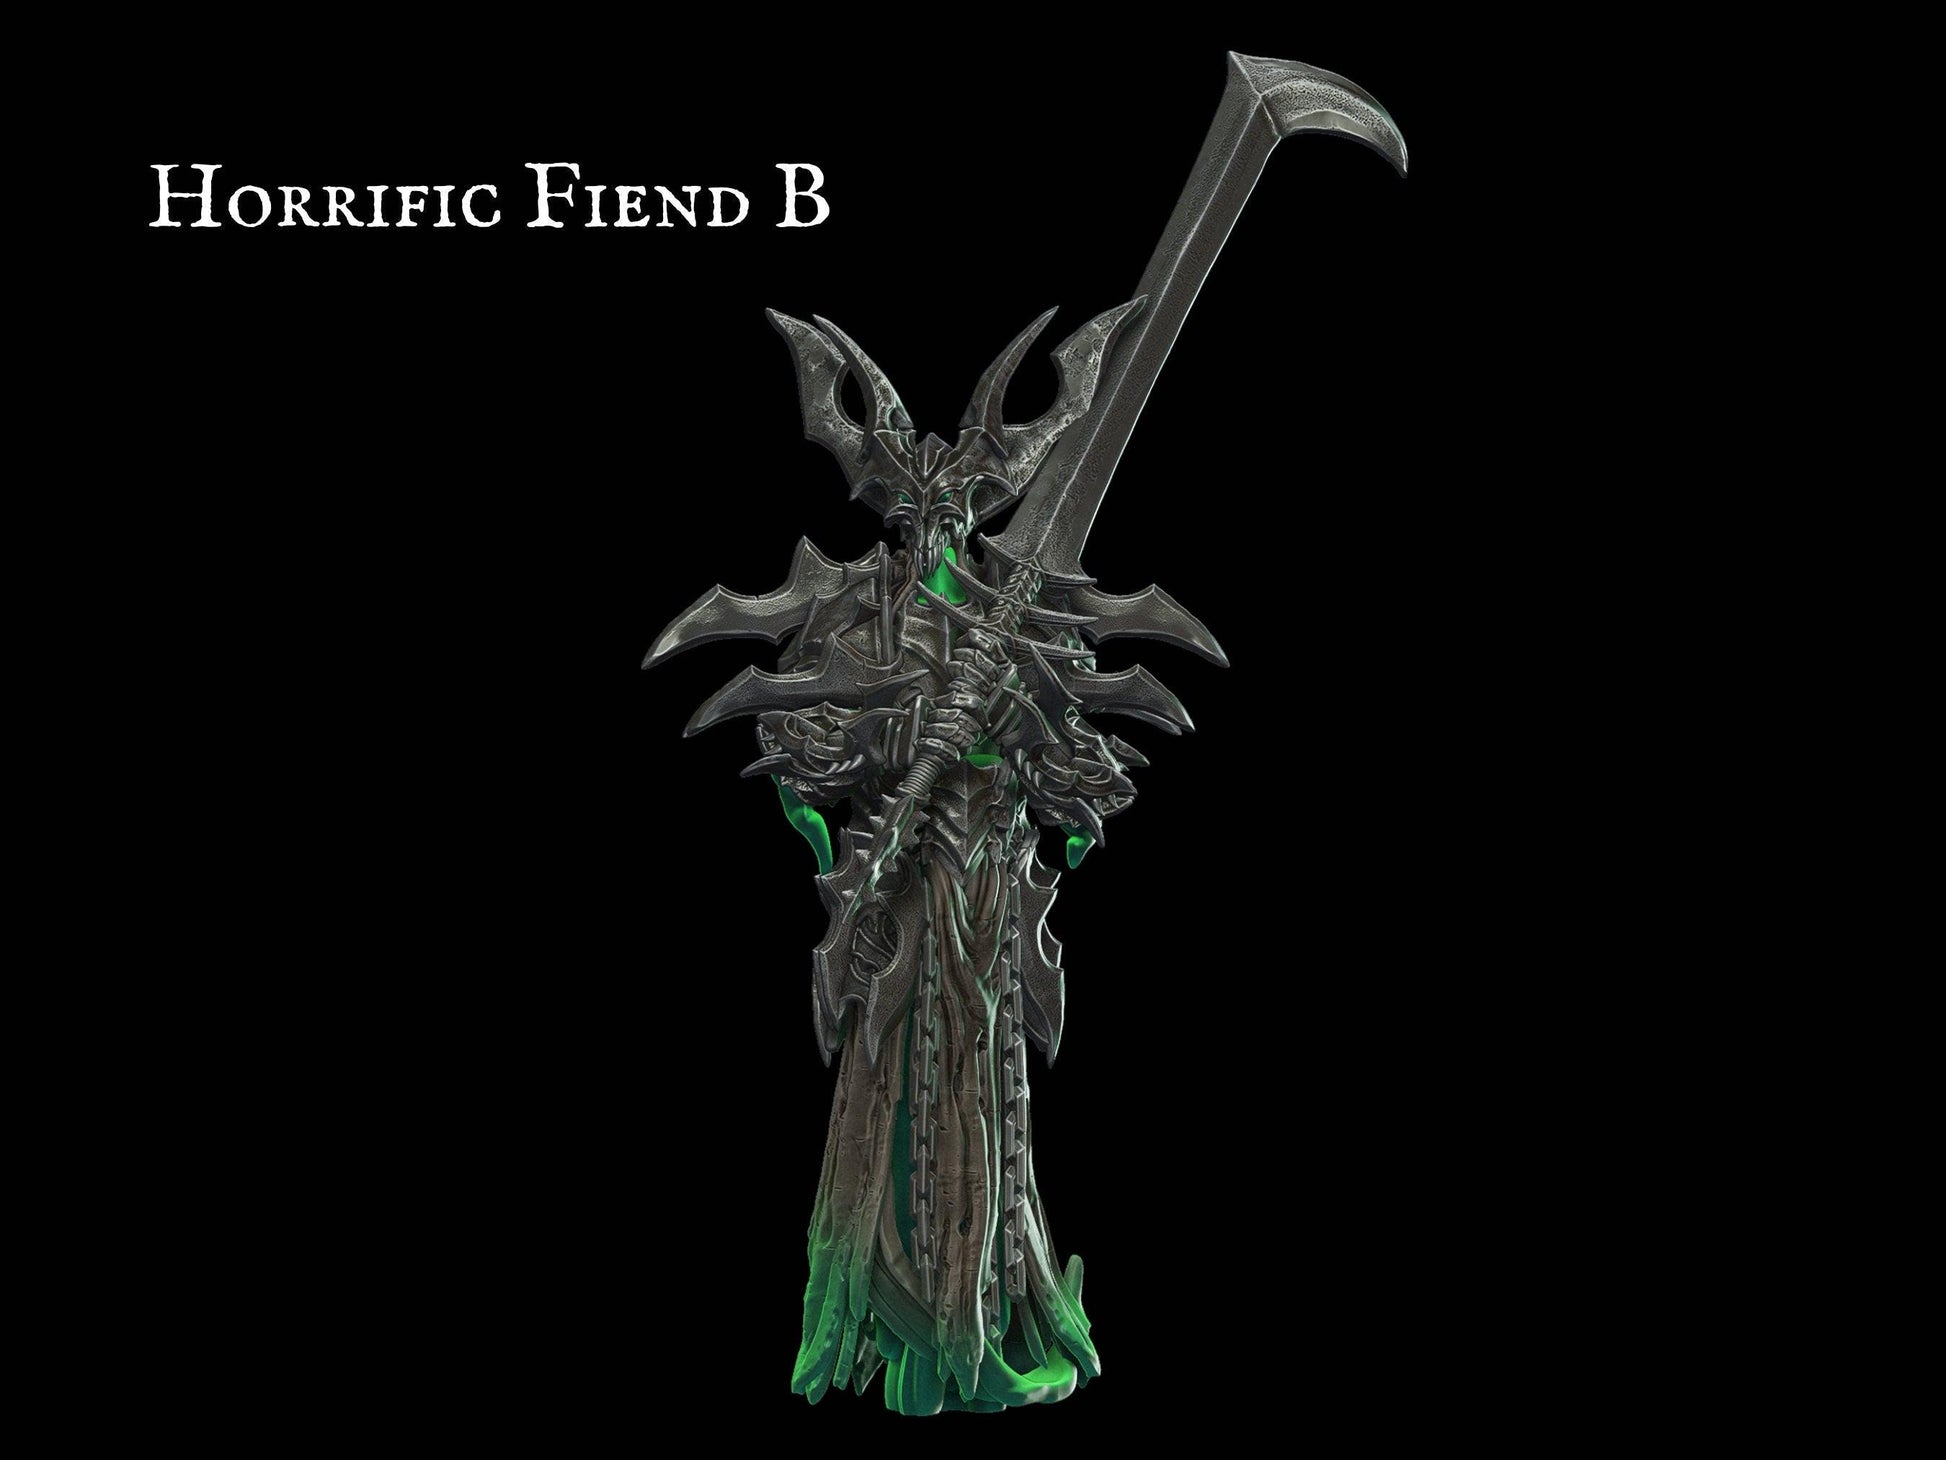 Horrific Fiend Miniature 28mm scale Tabletop gaming DnD Miniature Dungeons and Dragons, ttrpg dnd 5e dungeon master gift - Plague Miniatures shop for DnD Miniatures